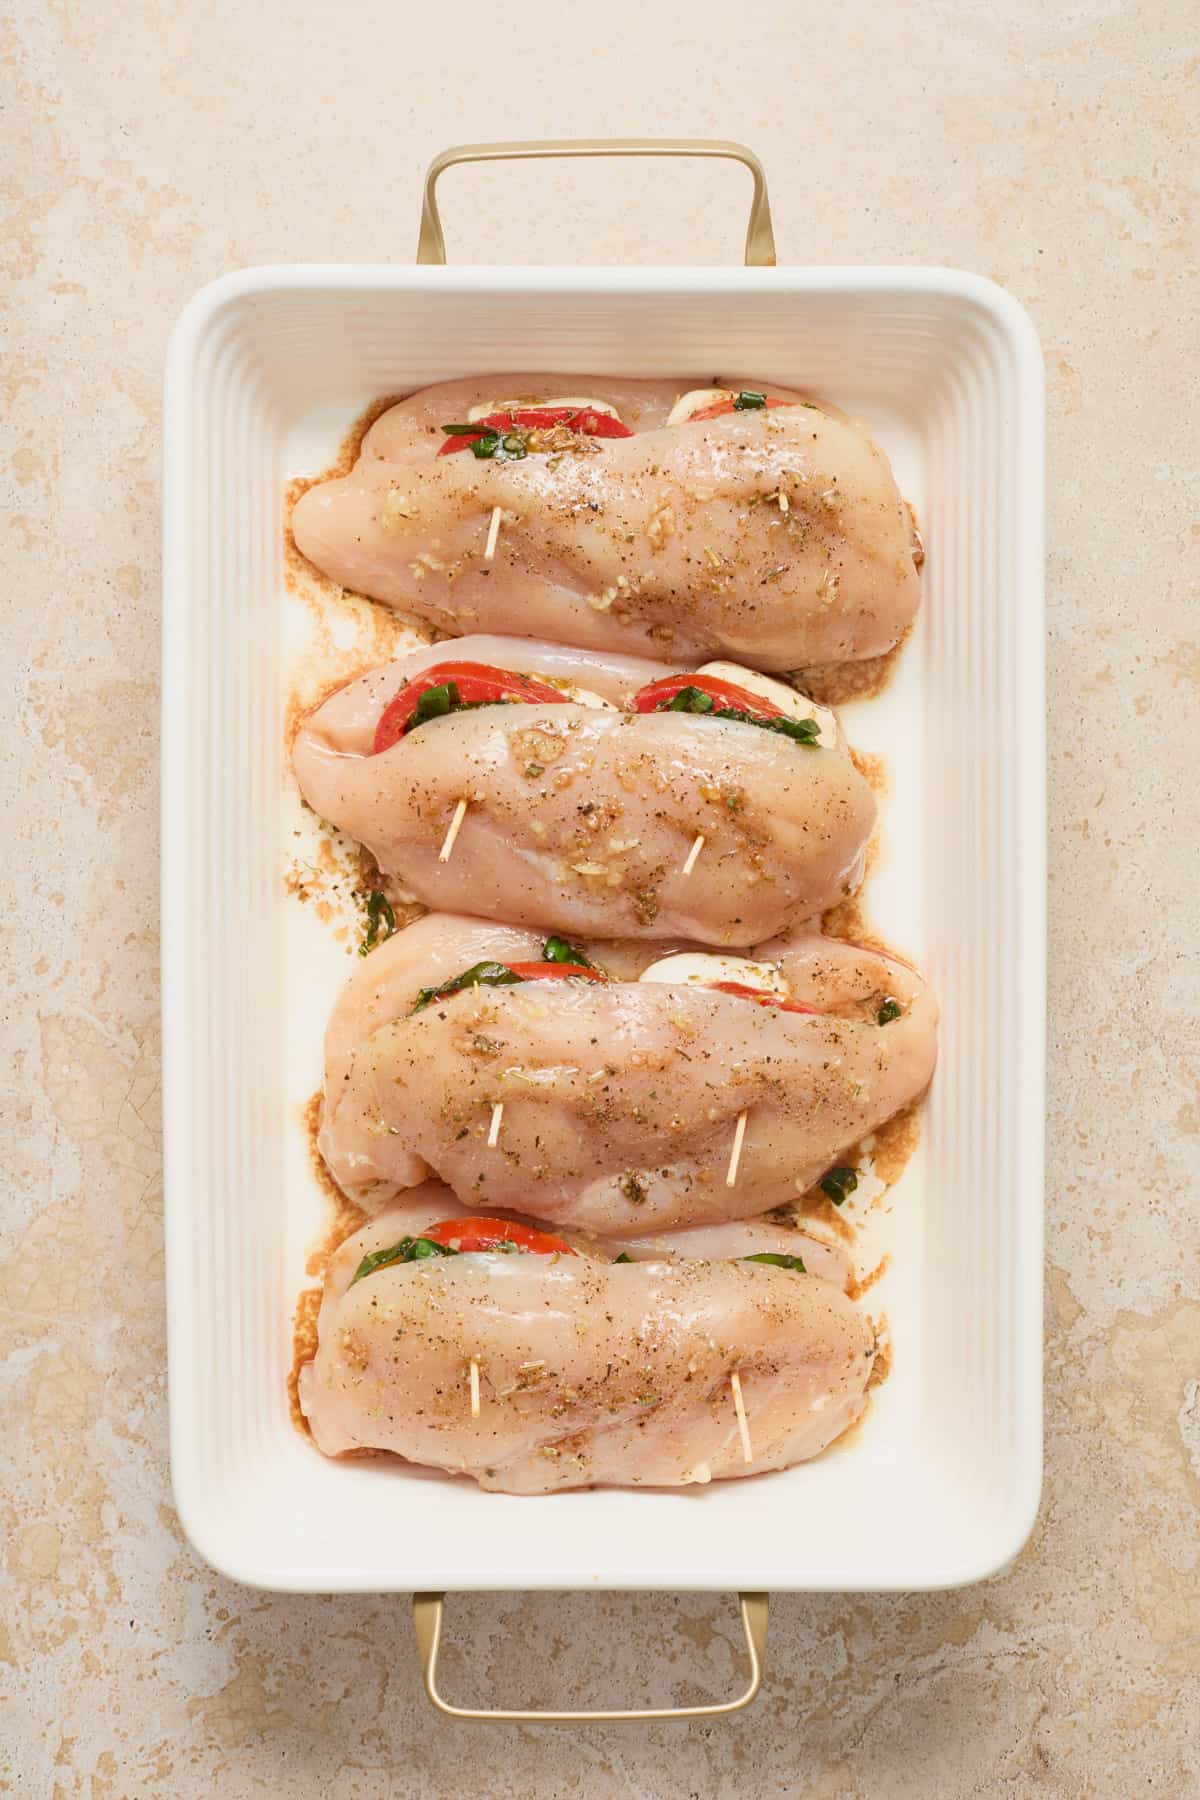 Baking dish with mozzarella, tomato and basil stuffed chicken breasts before baking.